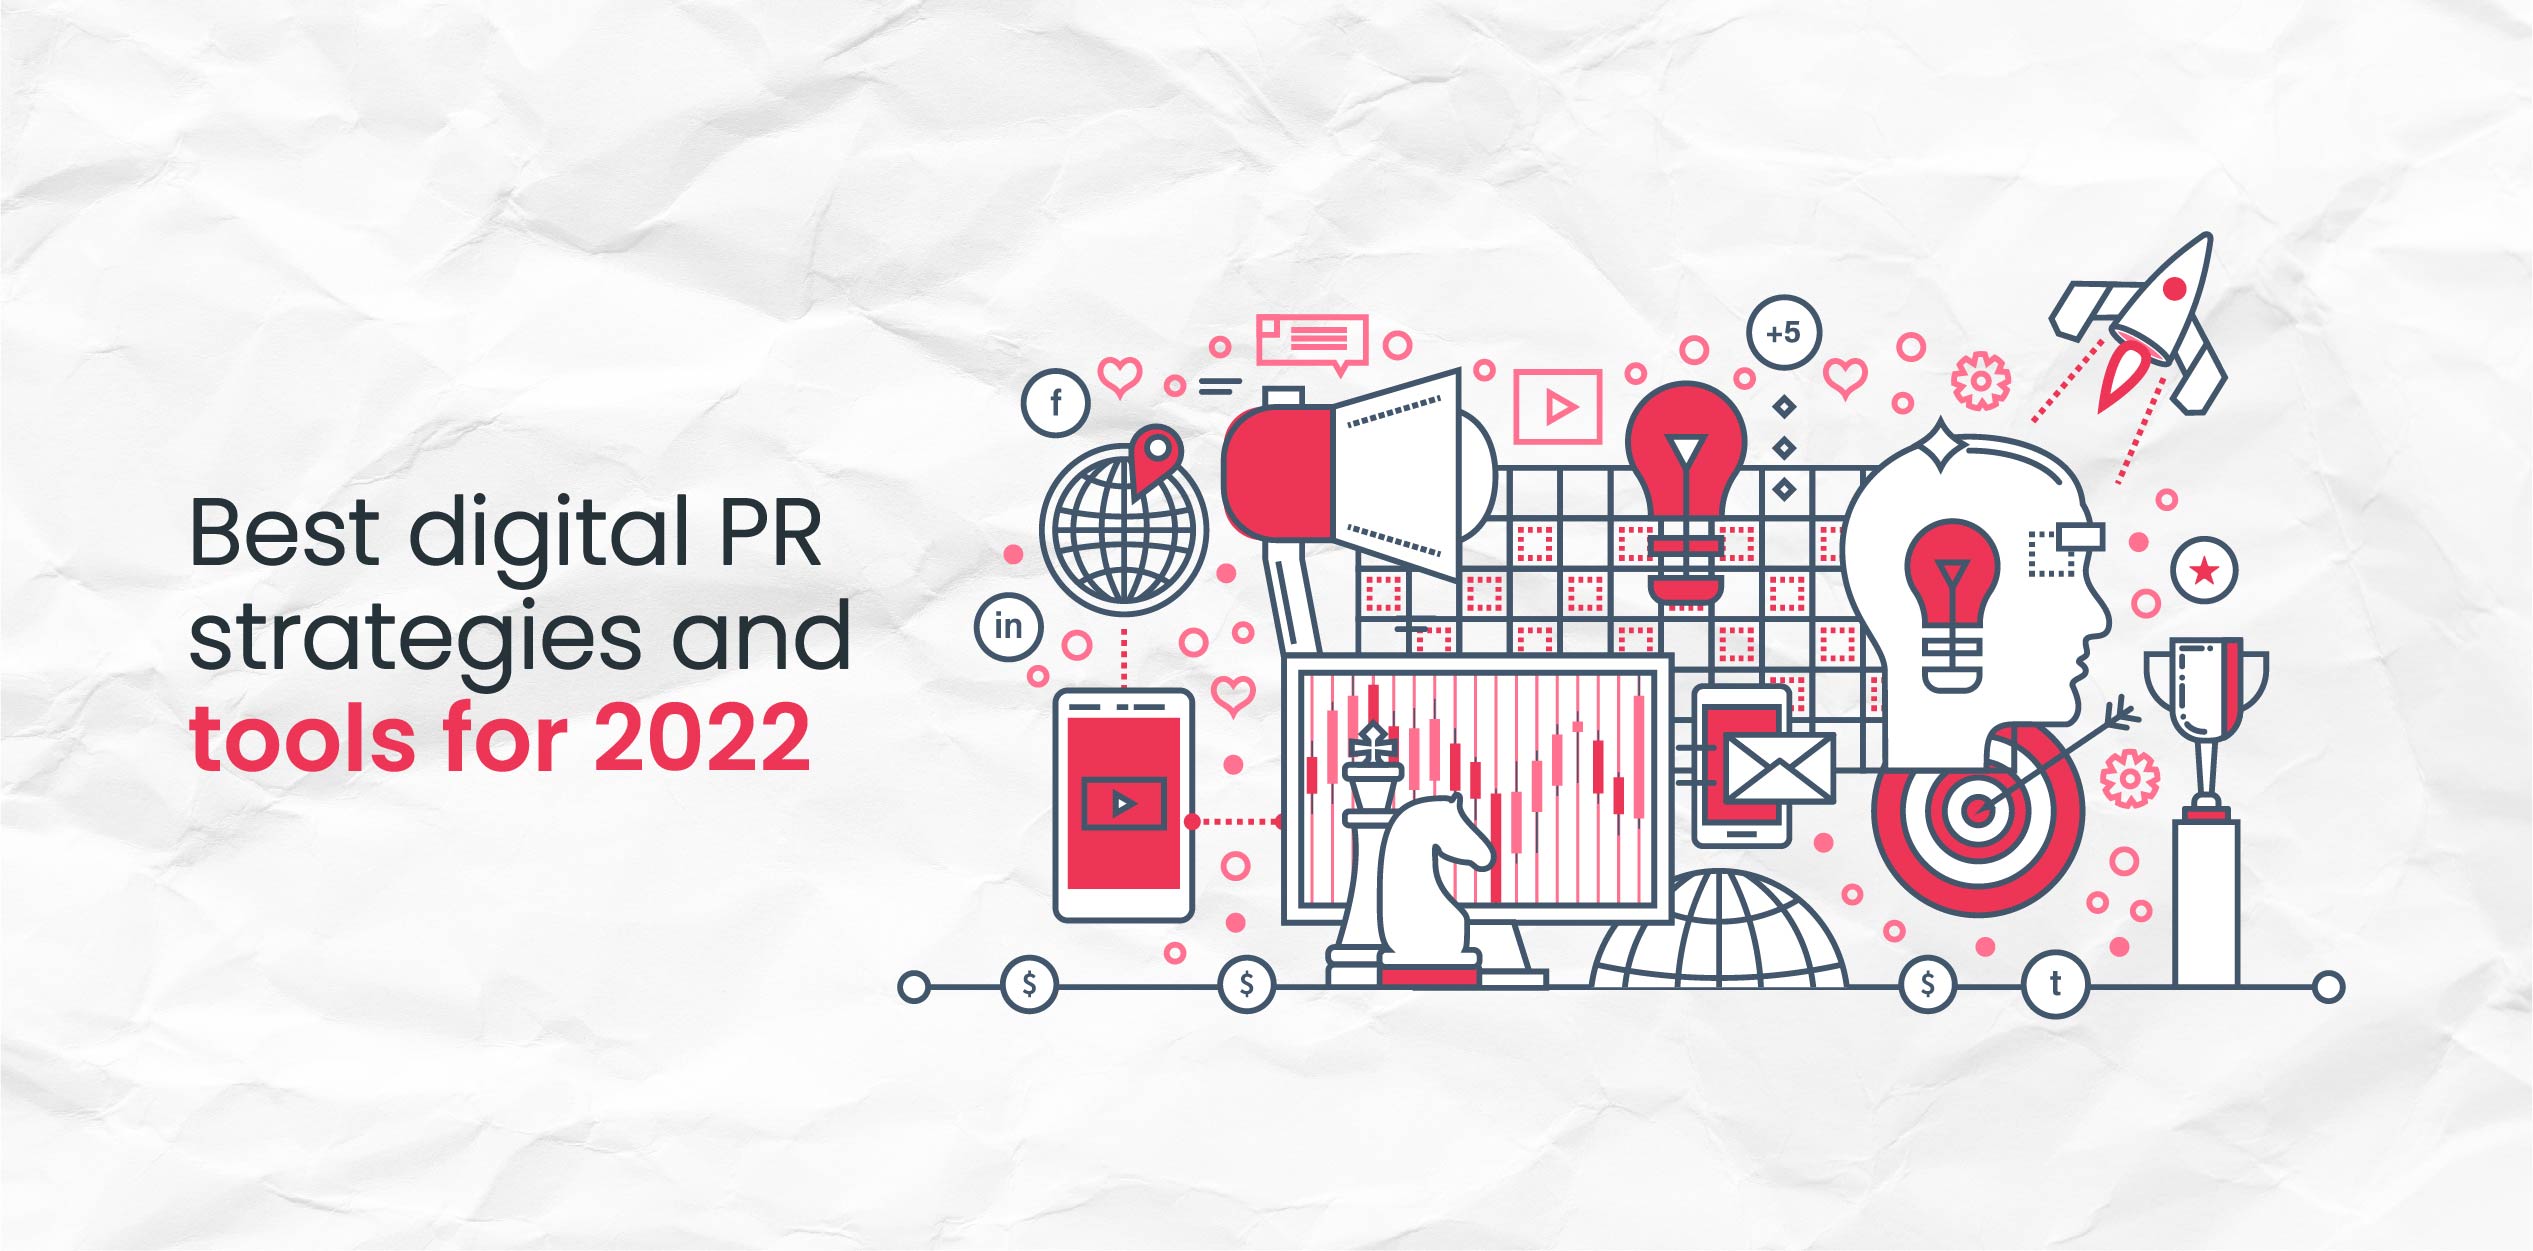 Best digital PR strategies and tools for 2022